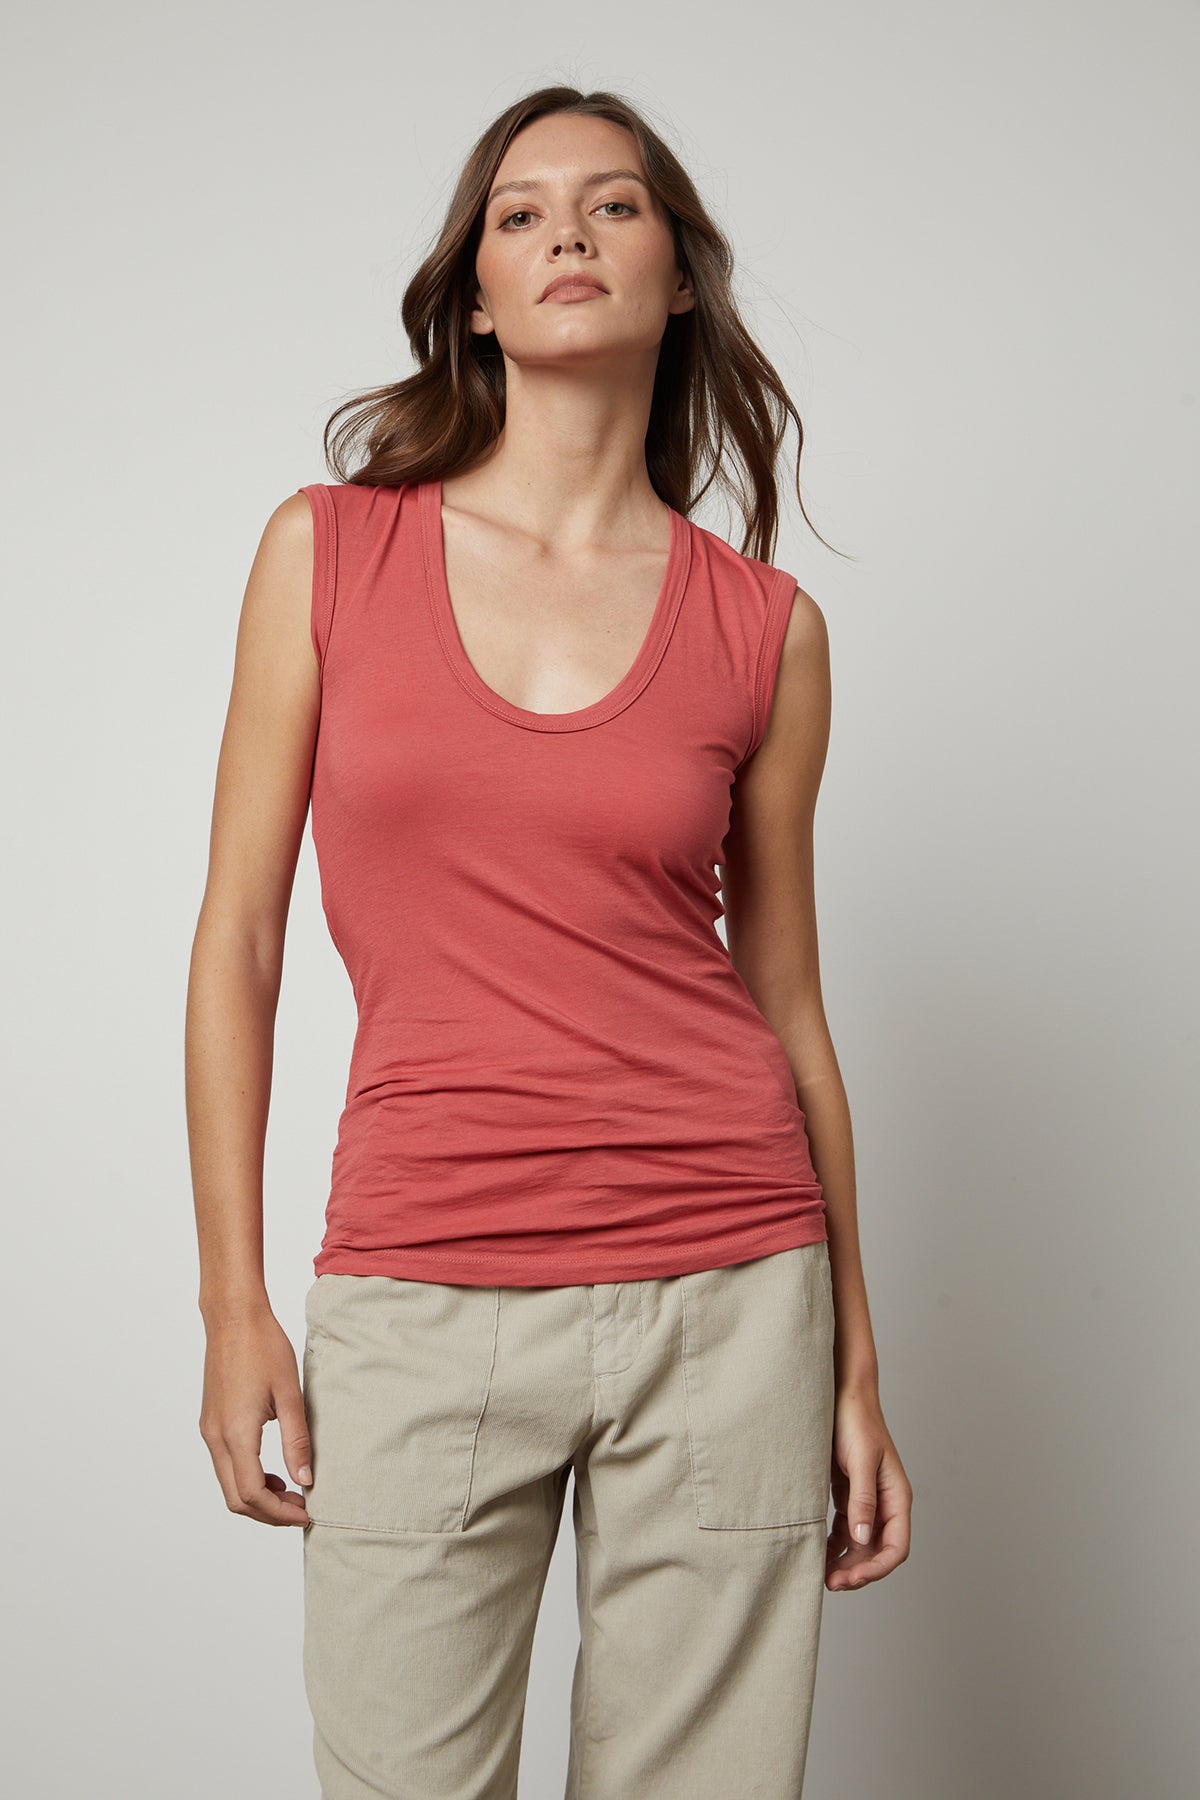 A woman wearing a Velvet by Graham & Spencer ESTINA GAUZY WHISPER FITTED TANK TOP and khaki pants.-35782798016705